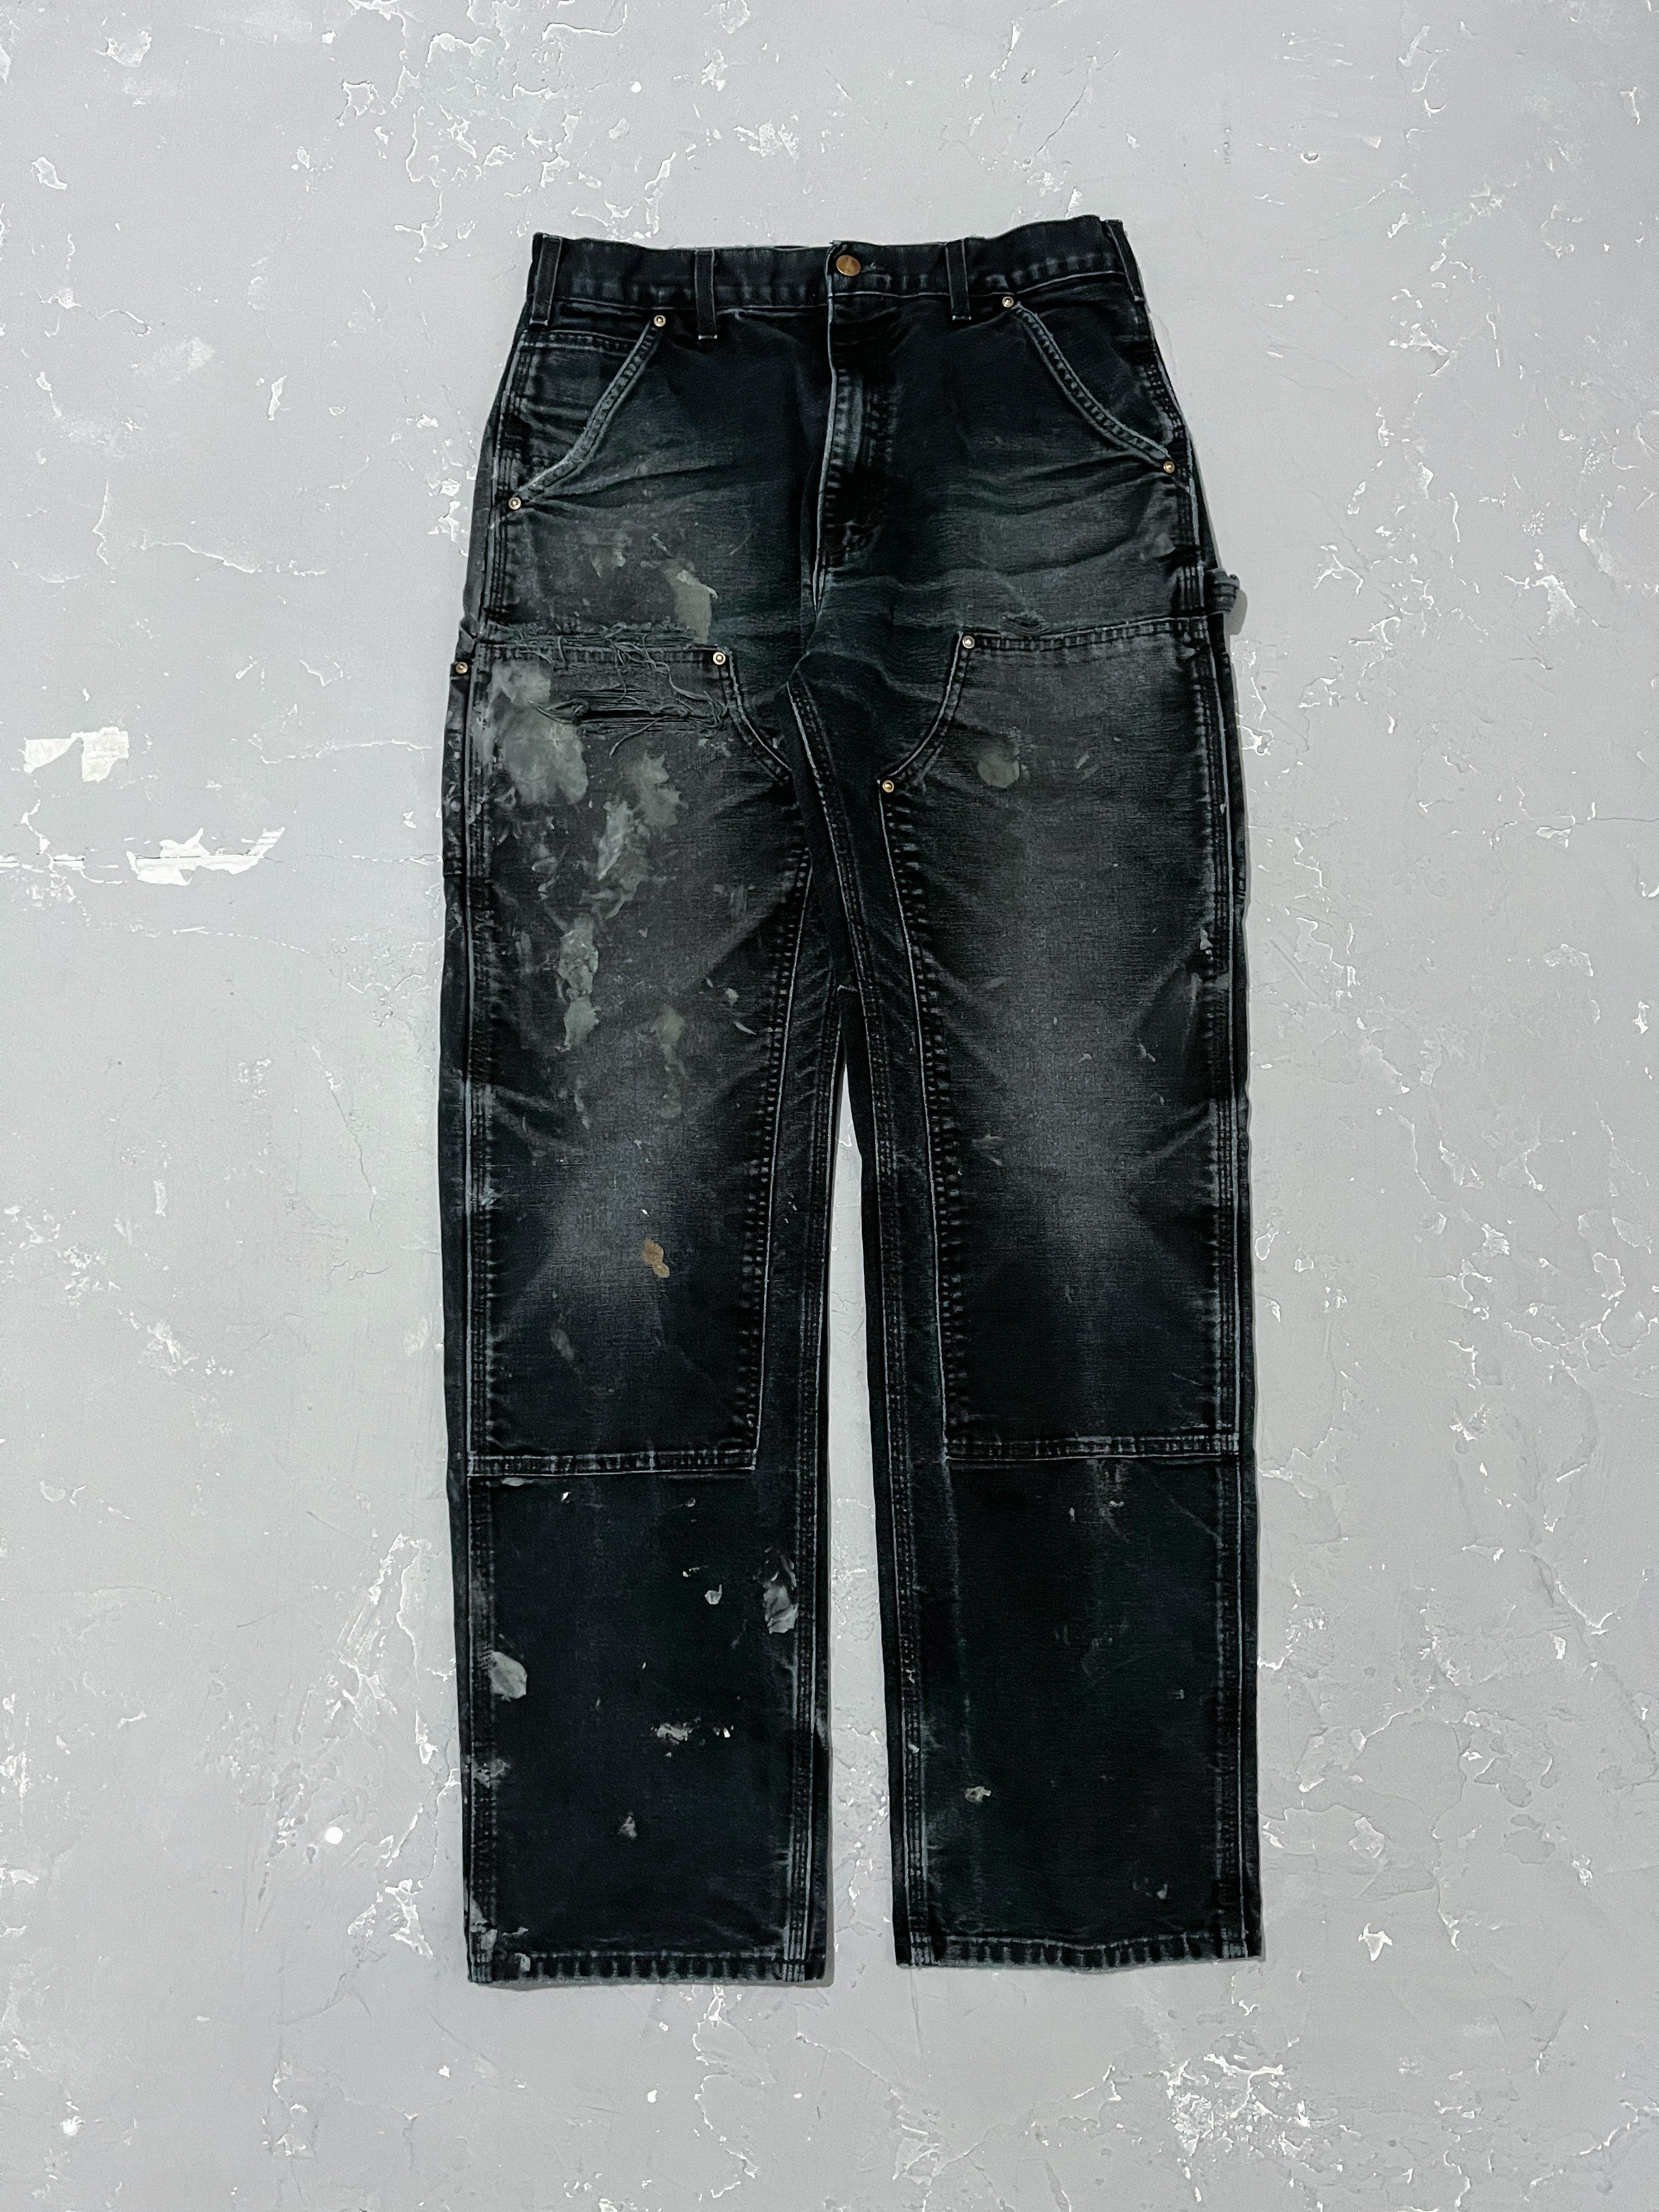 Carhartt Faded Black Painted Double Knee Pants [32 x 32]